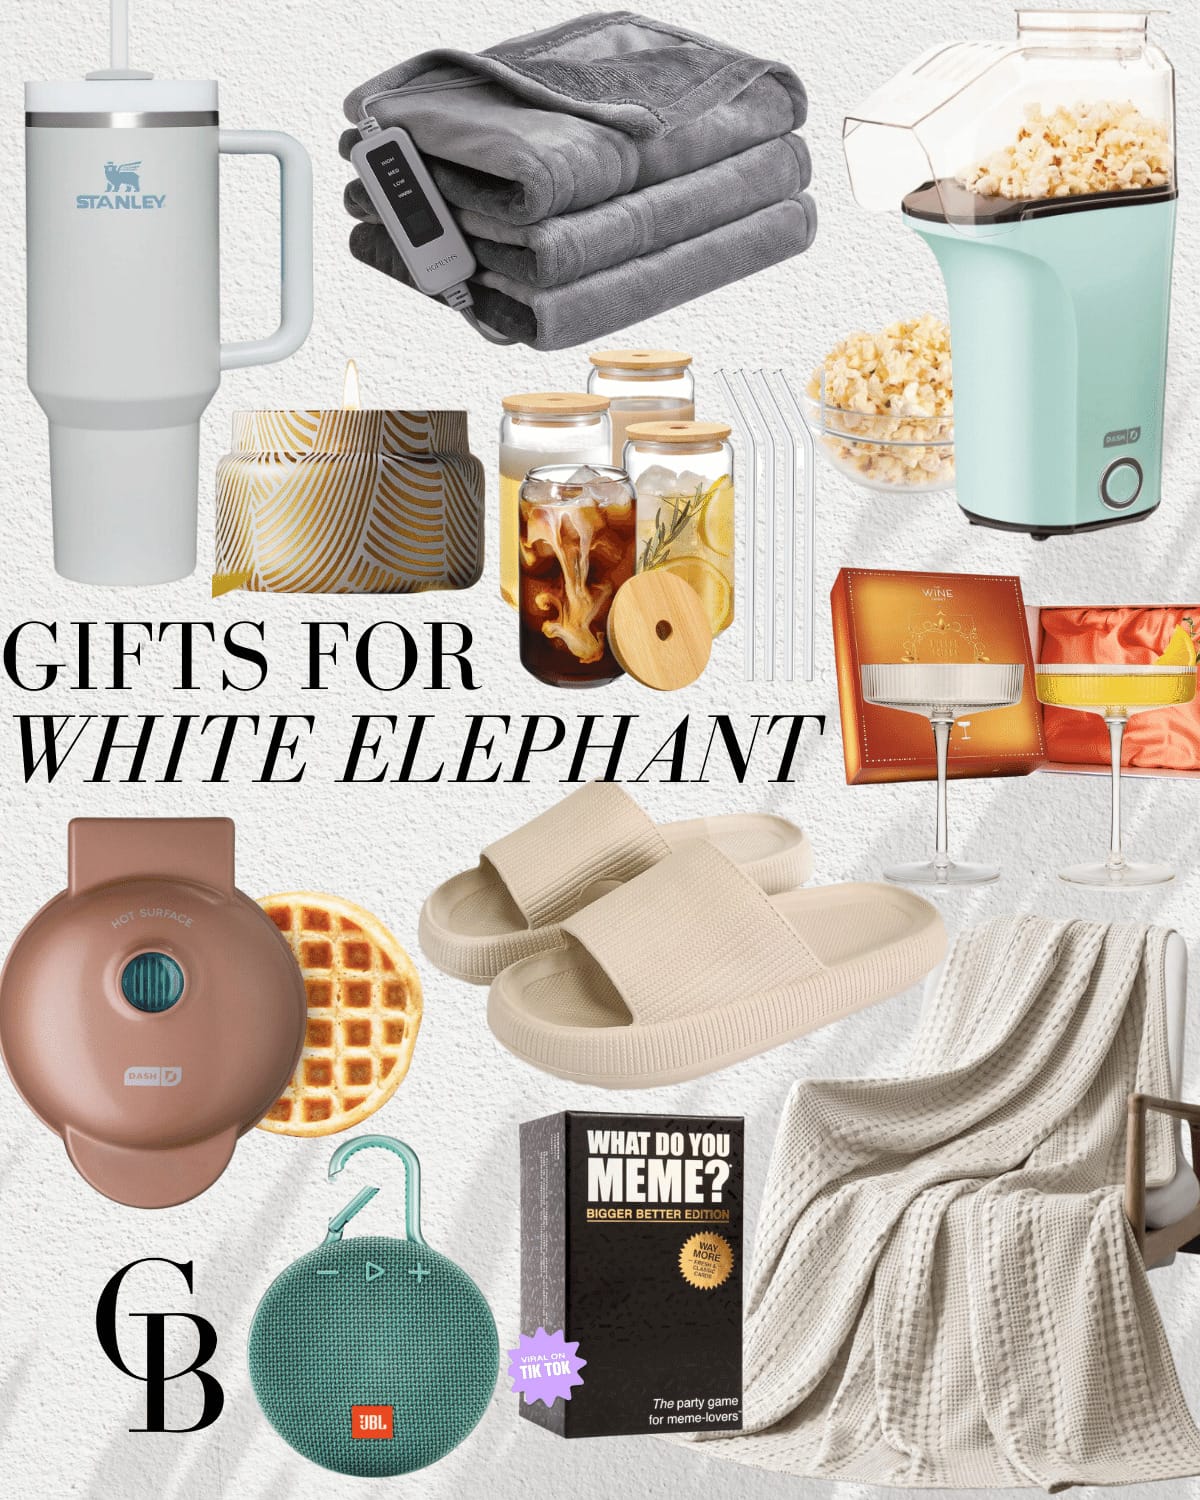 10 holiday gift guides everyone will love | #holiday #giftguide #christmas #giftideas #giftsforwhiteelephant #whiteelephant #secretsanta #holidayparty #gifts #giftidea #wafflemaker #blanket #stanley